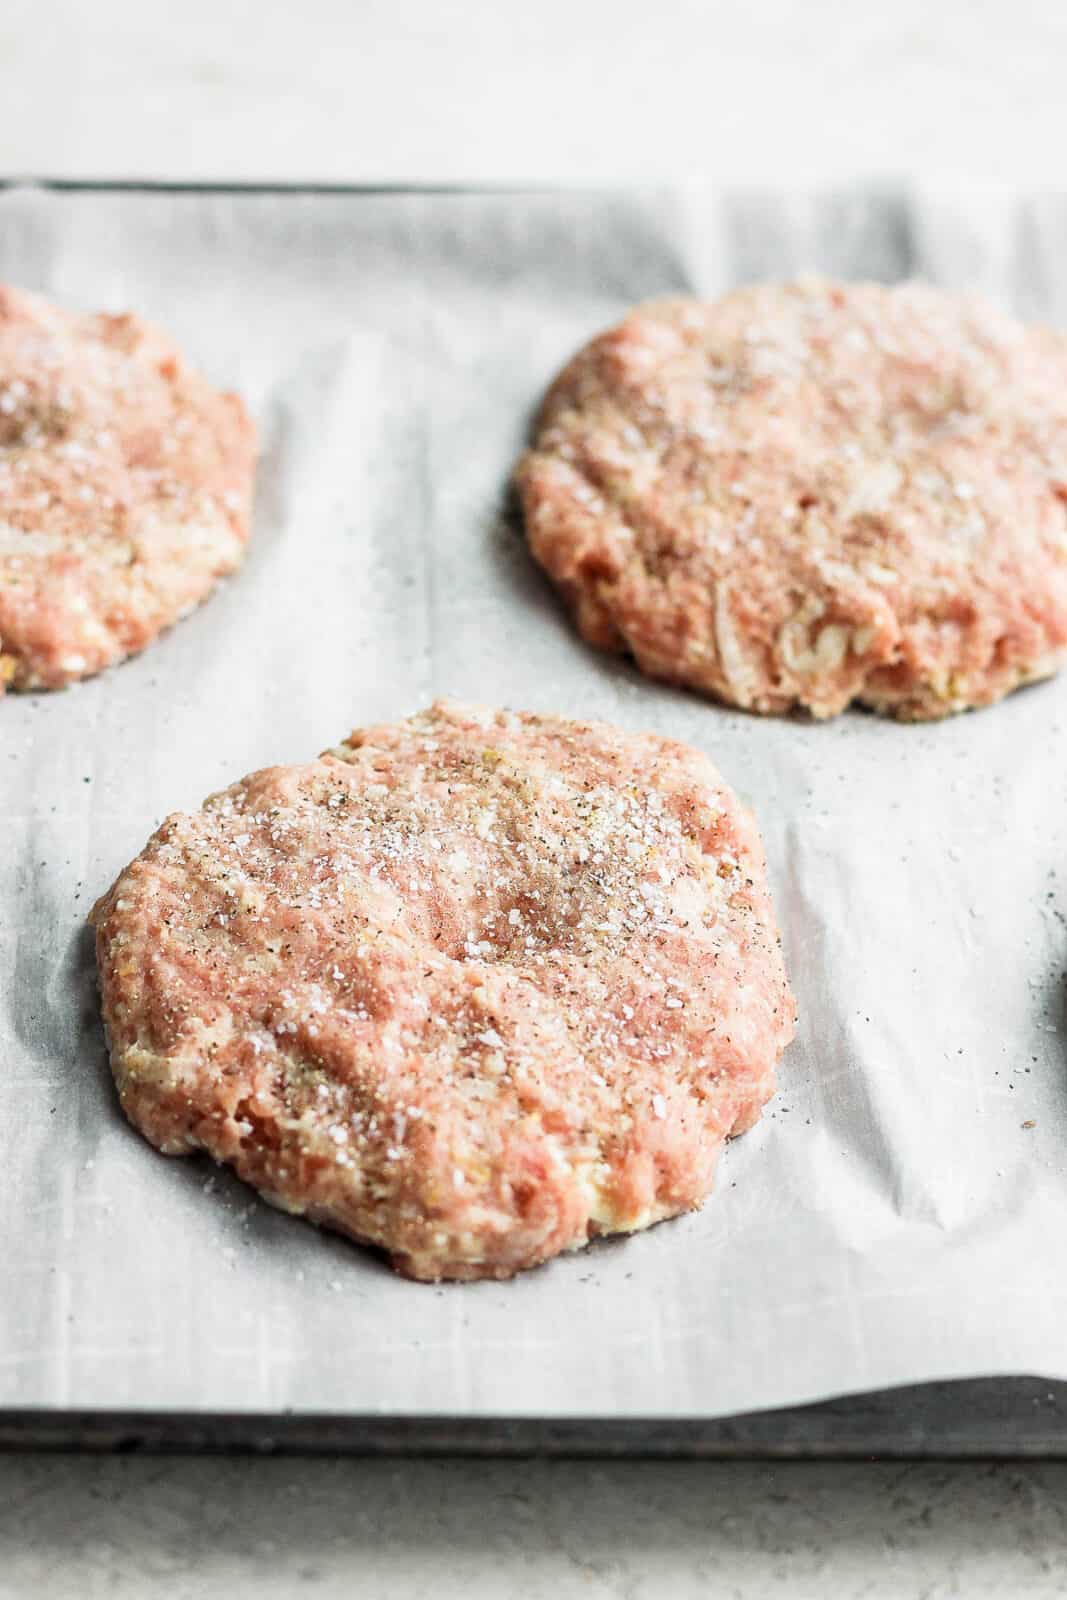 Turkey burger patties on a parchment-lined baking sheet.